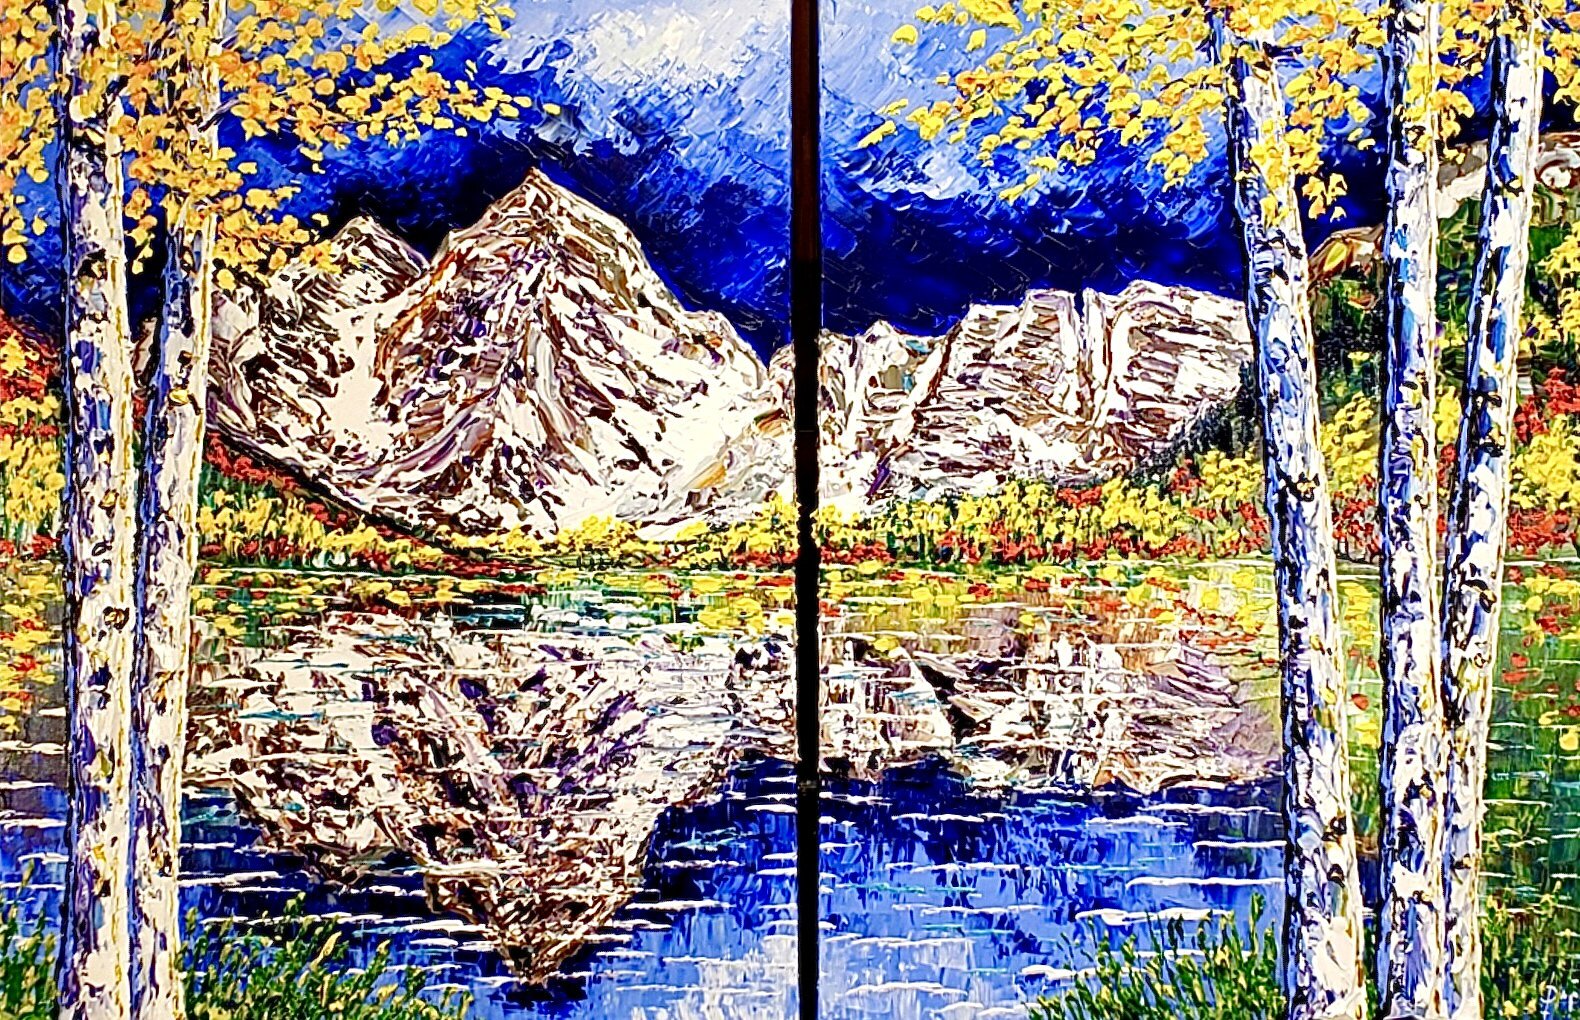 Mountain of Graceful Reflection,&nbsp; 48x72